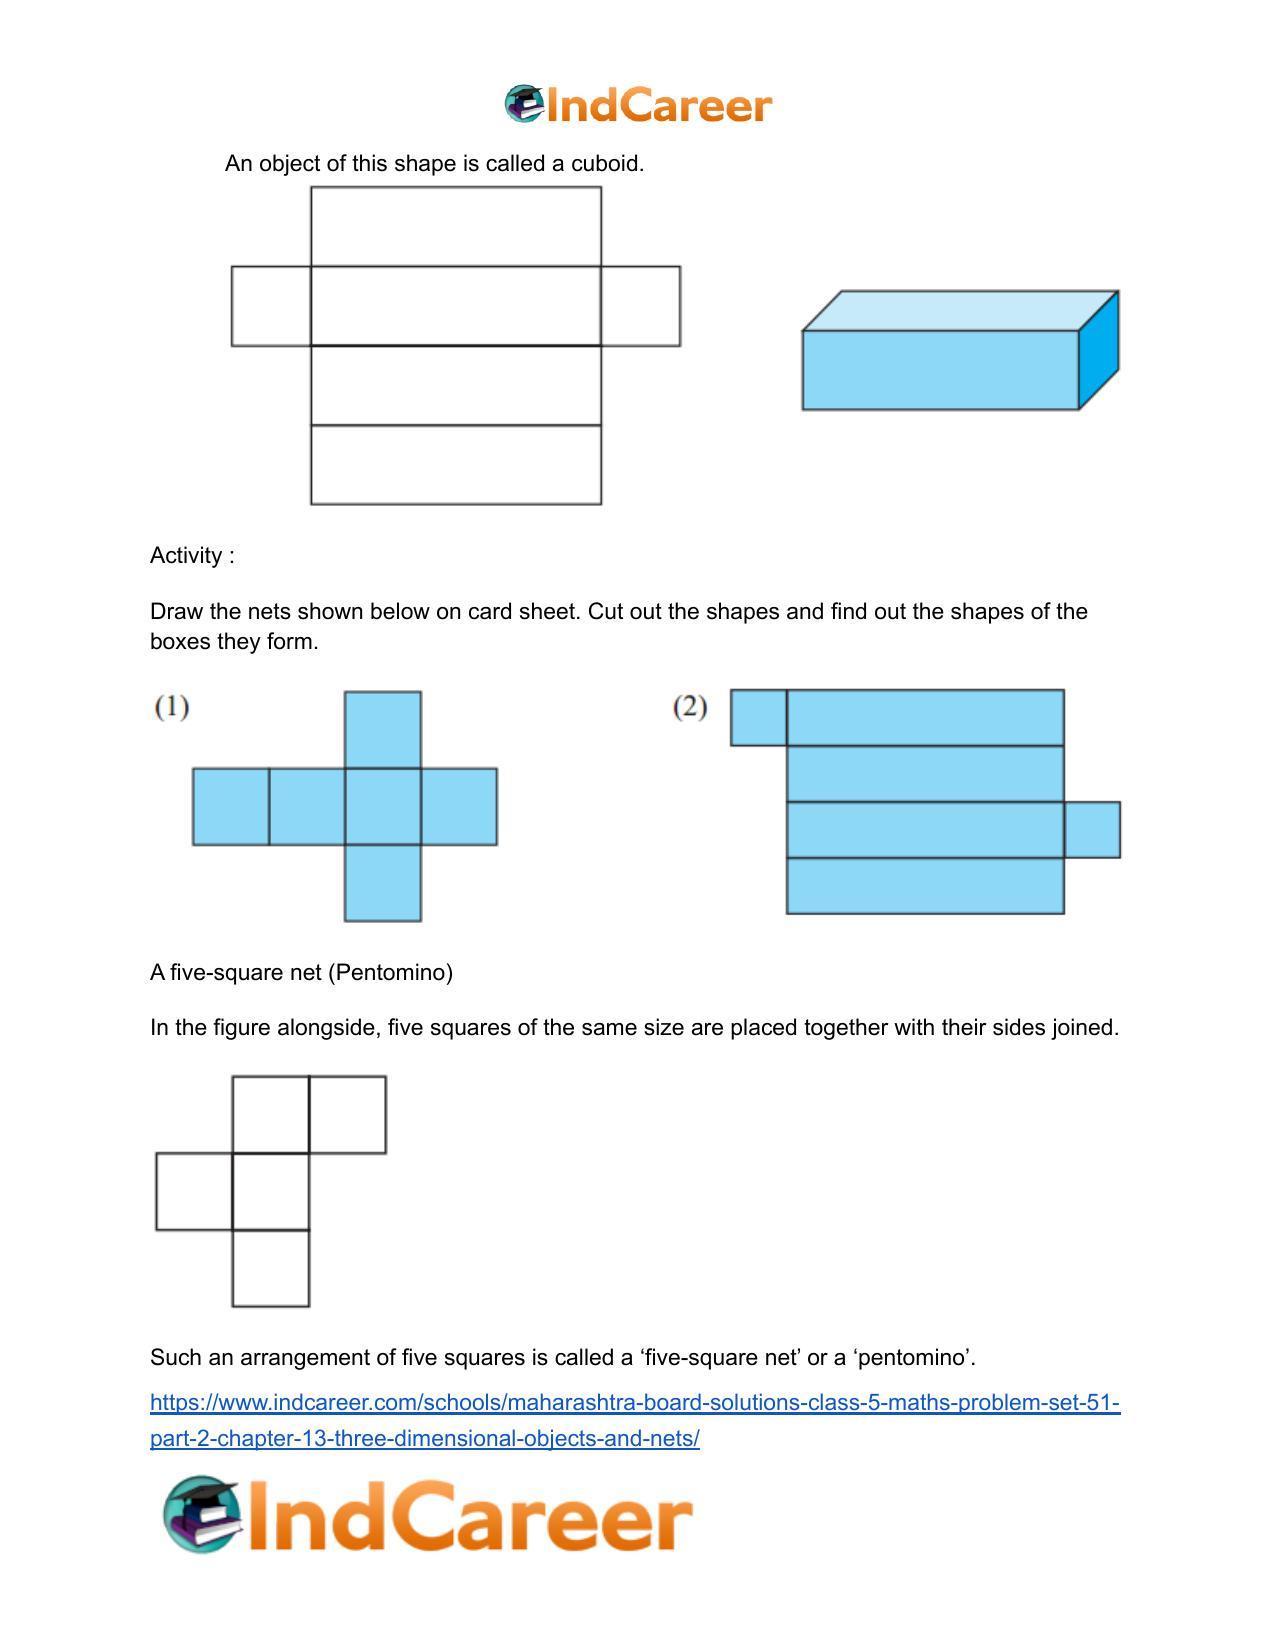 Maharashtra Board Solutions Class 5-Maths (Problem Set 51) - Part 2: Chapter 13- Three Dimensional Objects and Nets - Page 6